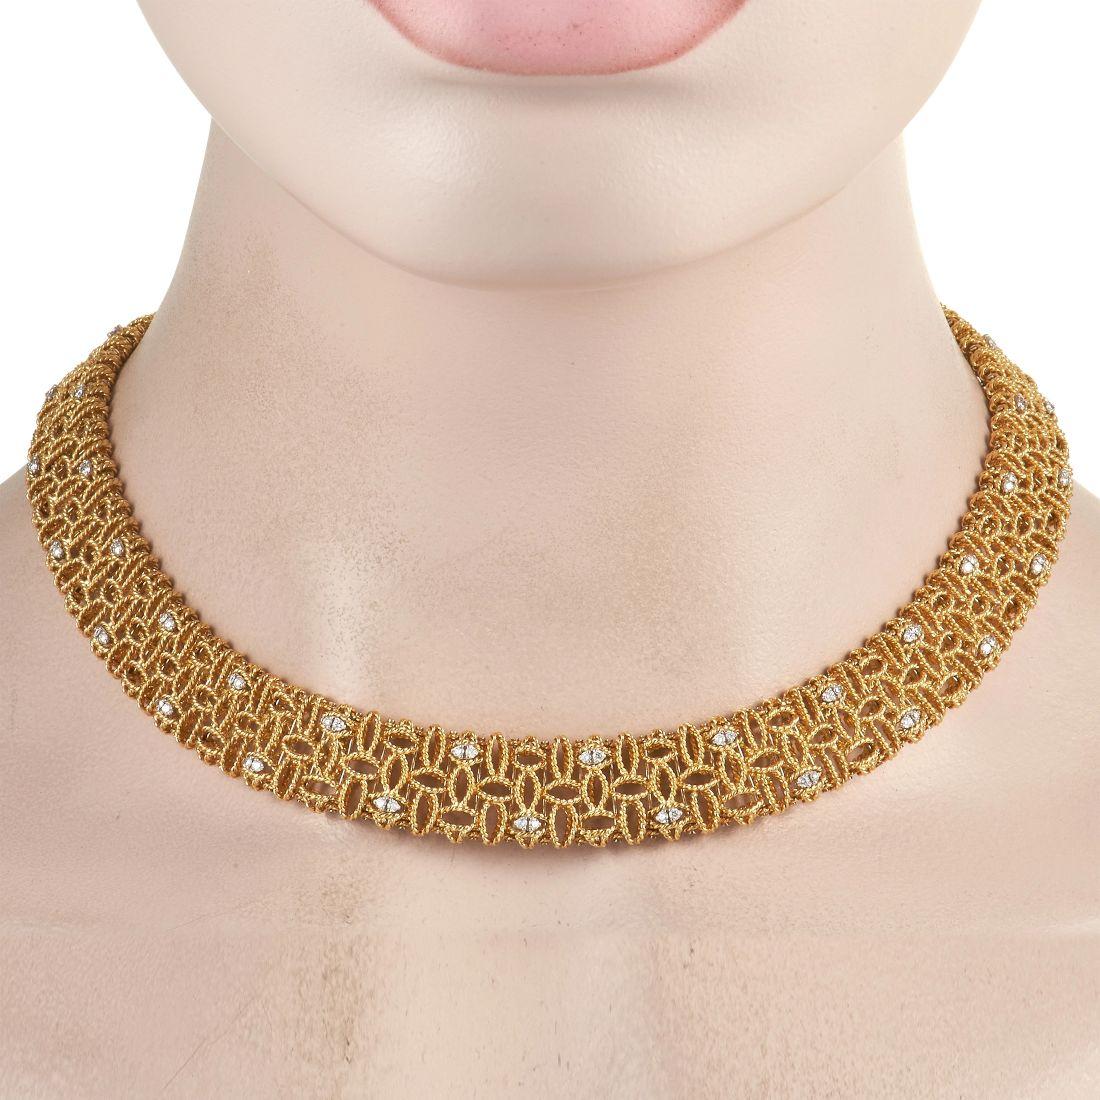 Intricate metalwork makes this Roberto Coin Barocco necklace an elegant piece that will continually capture your imagination. The exquisite design measures 6.28” long and is effortlessly elevated by 1.50 carats of sparkling diamond accents. 
 
 This